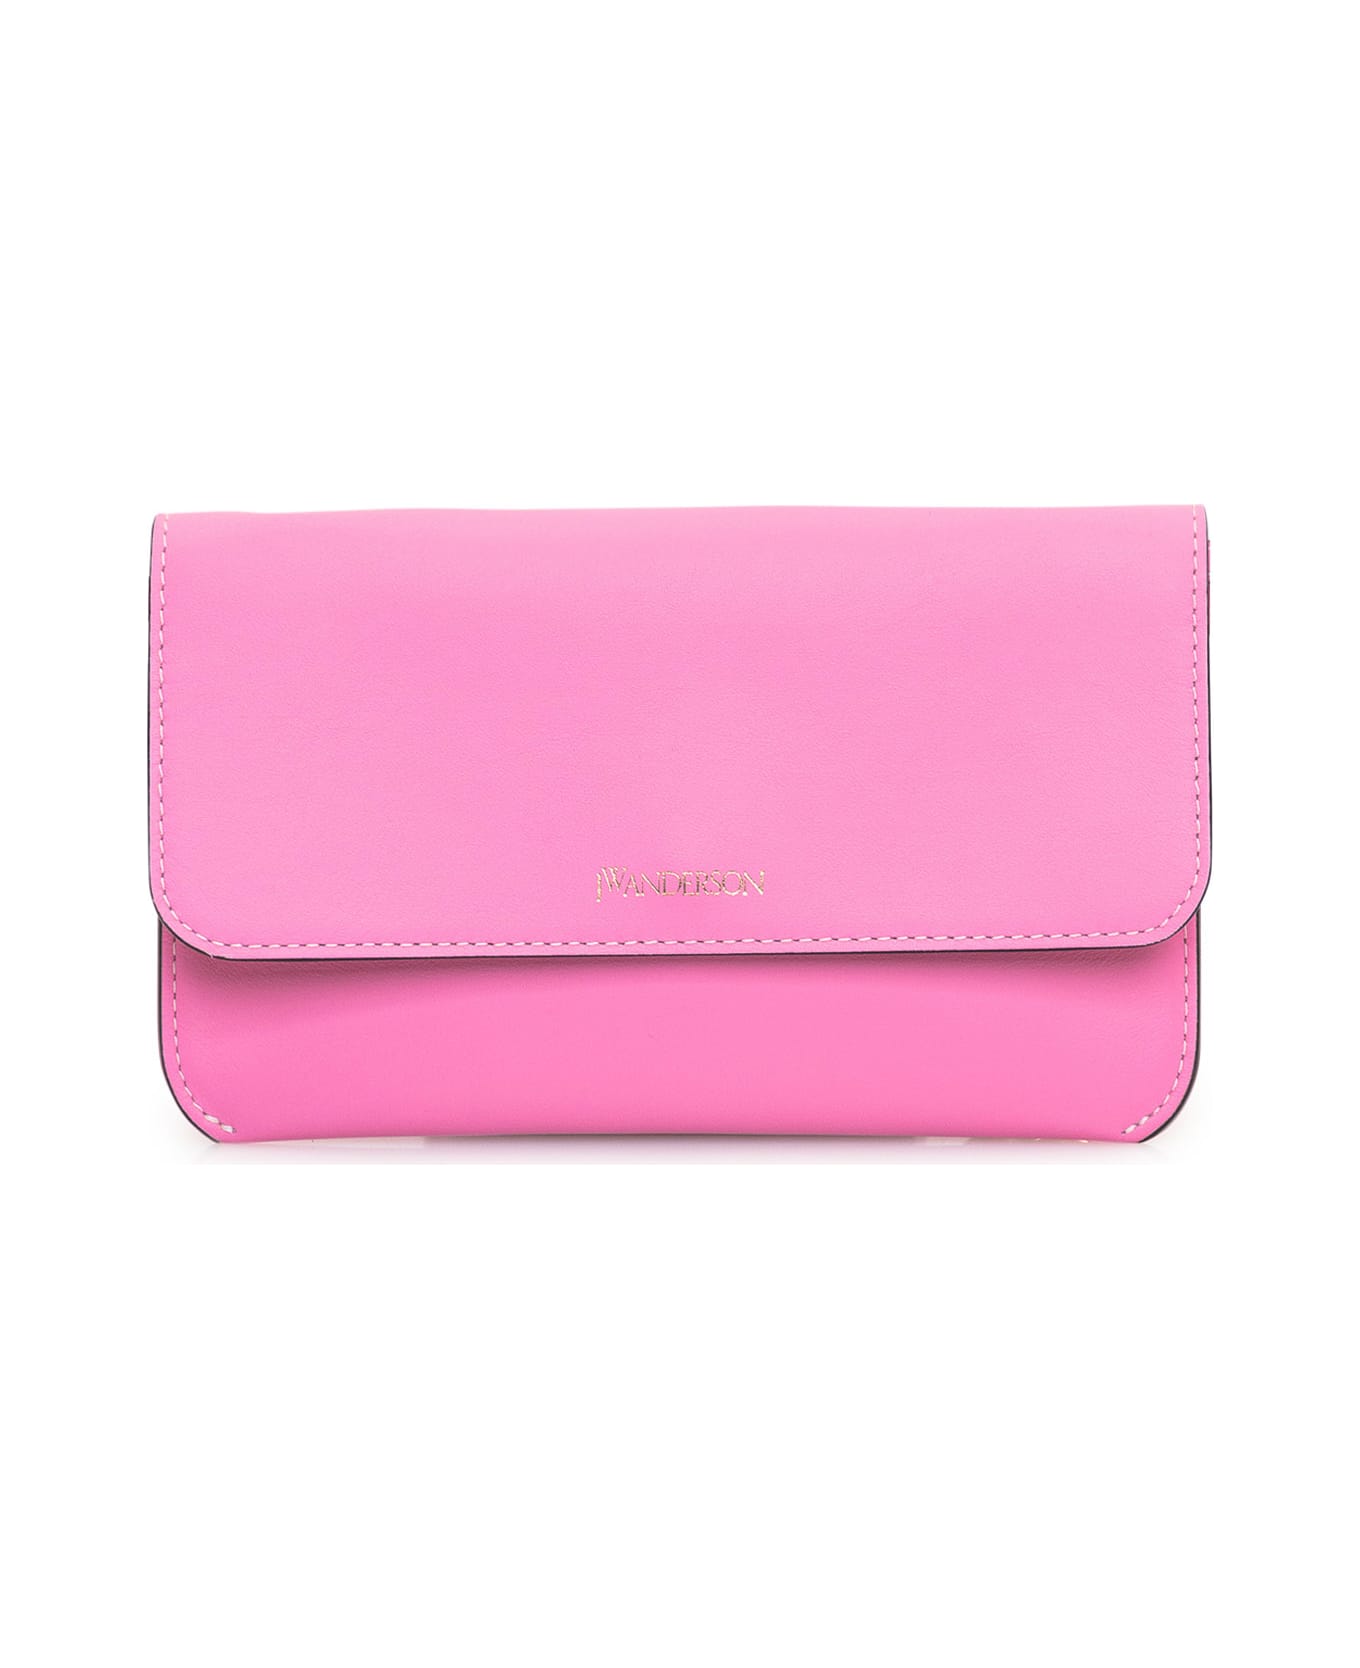 J.W. Anderson Chain Phone Clutch Bag - PINK クラッチバッグ